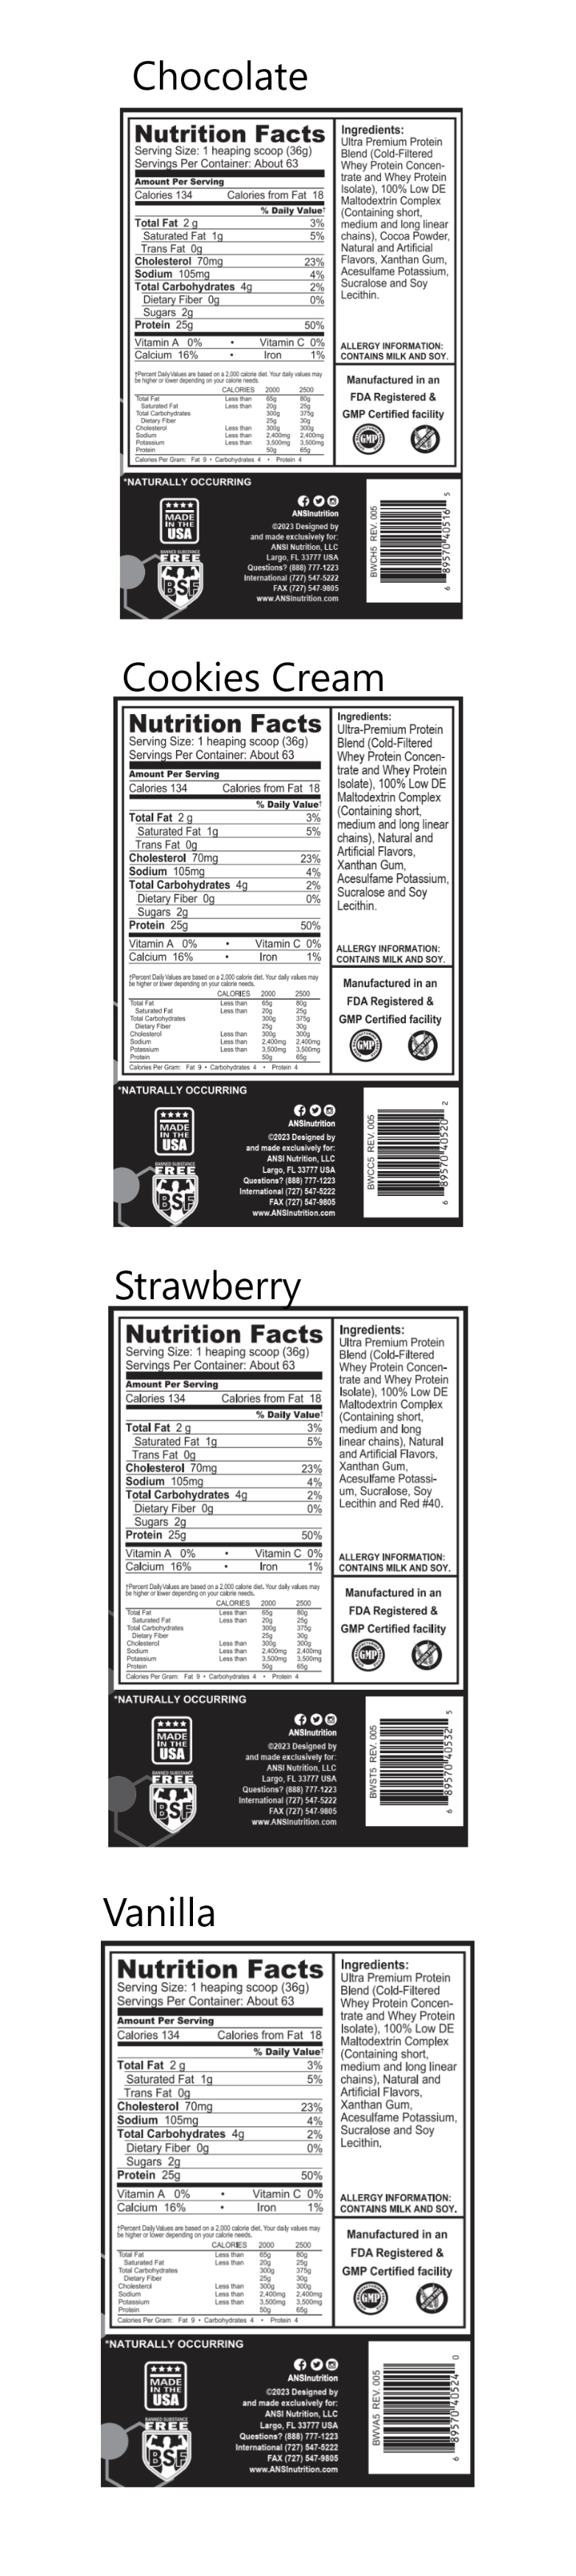 Nutrition facts for chocolate-flavored protein powder with 134 calories, 2g fat, 1g saturated fat, 70mg cholesterol, 105mg sodium, 4g carbs, 2g sugar, and 25g protein per serving.